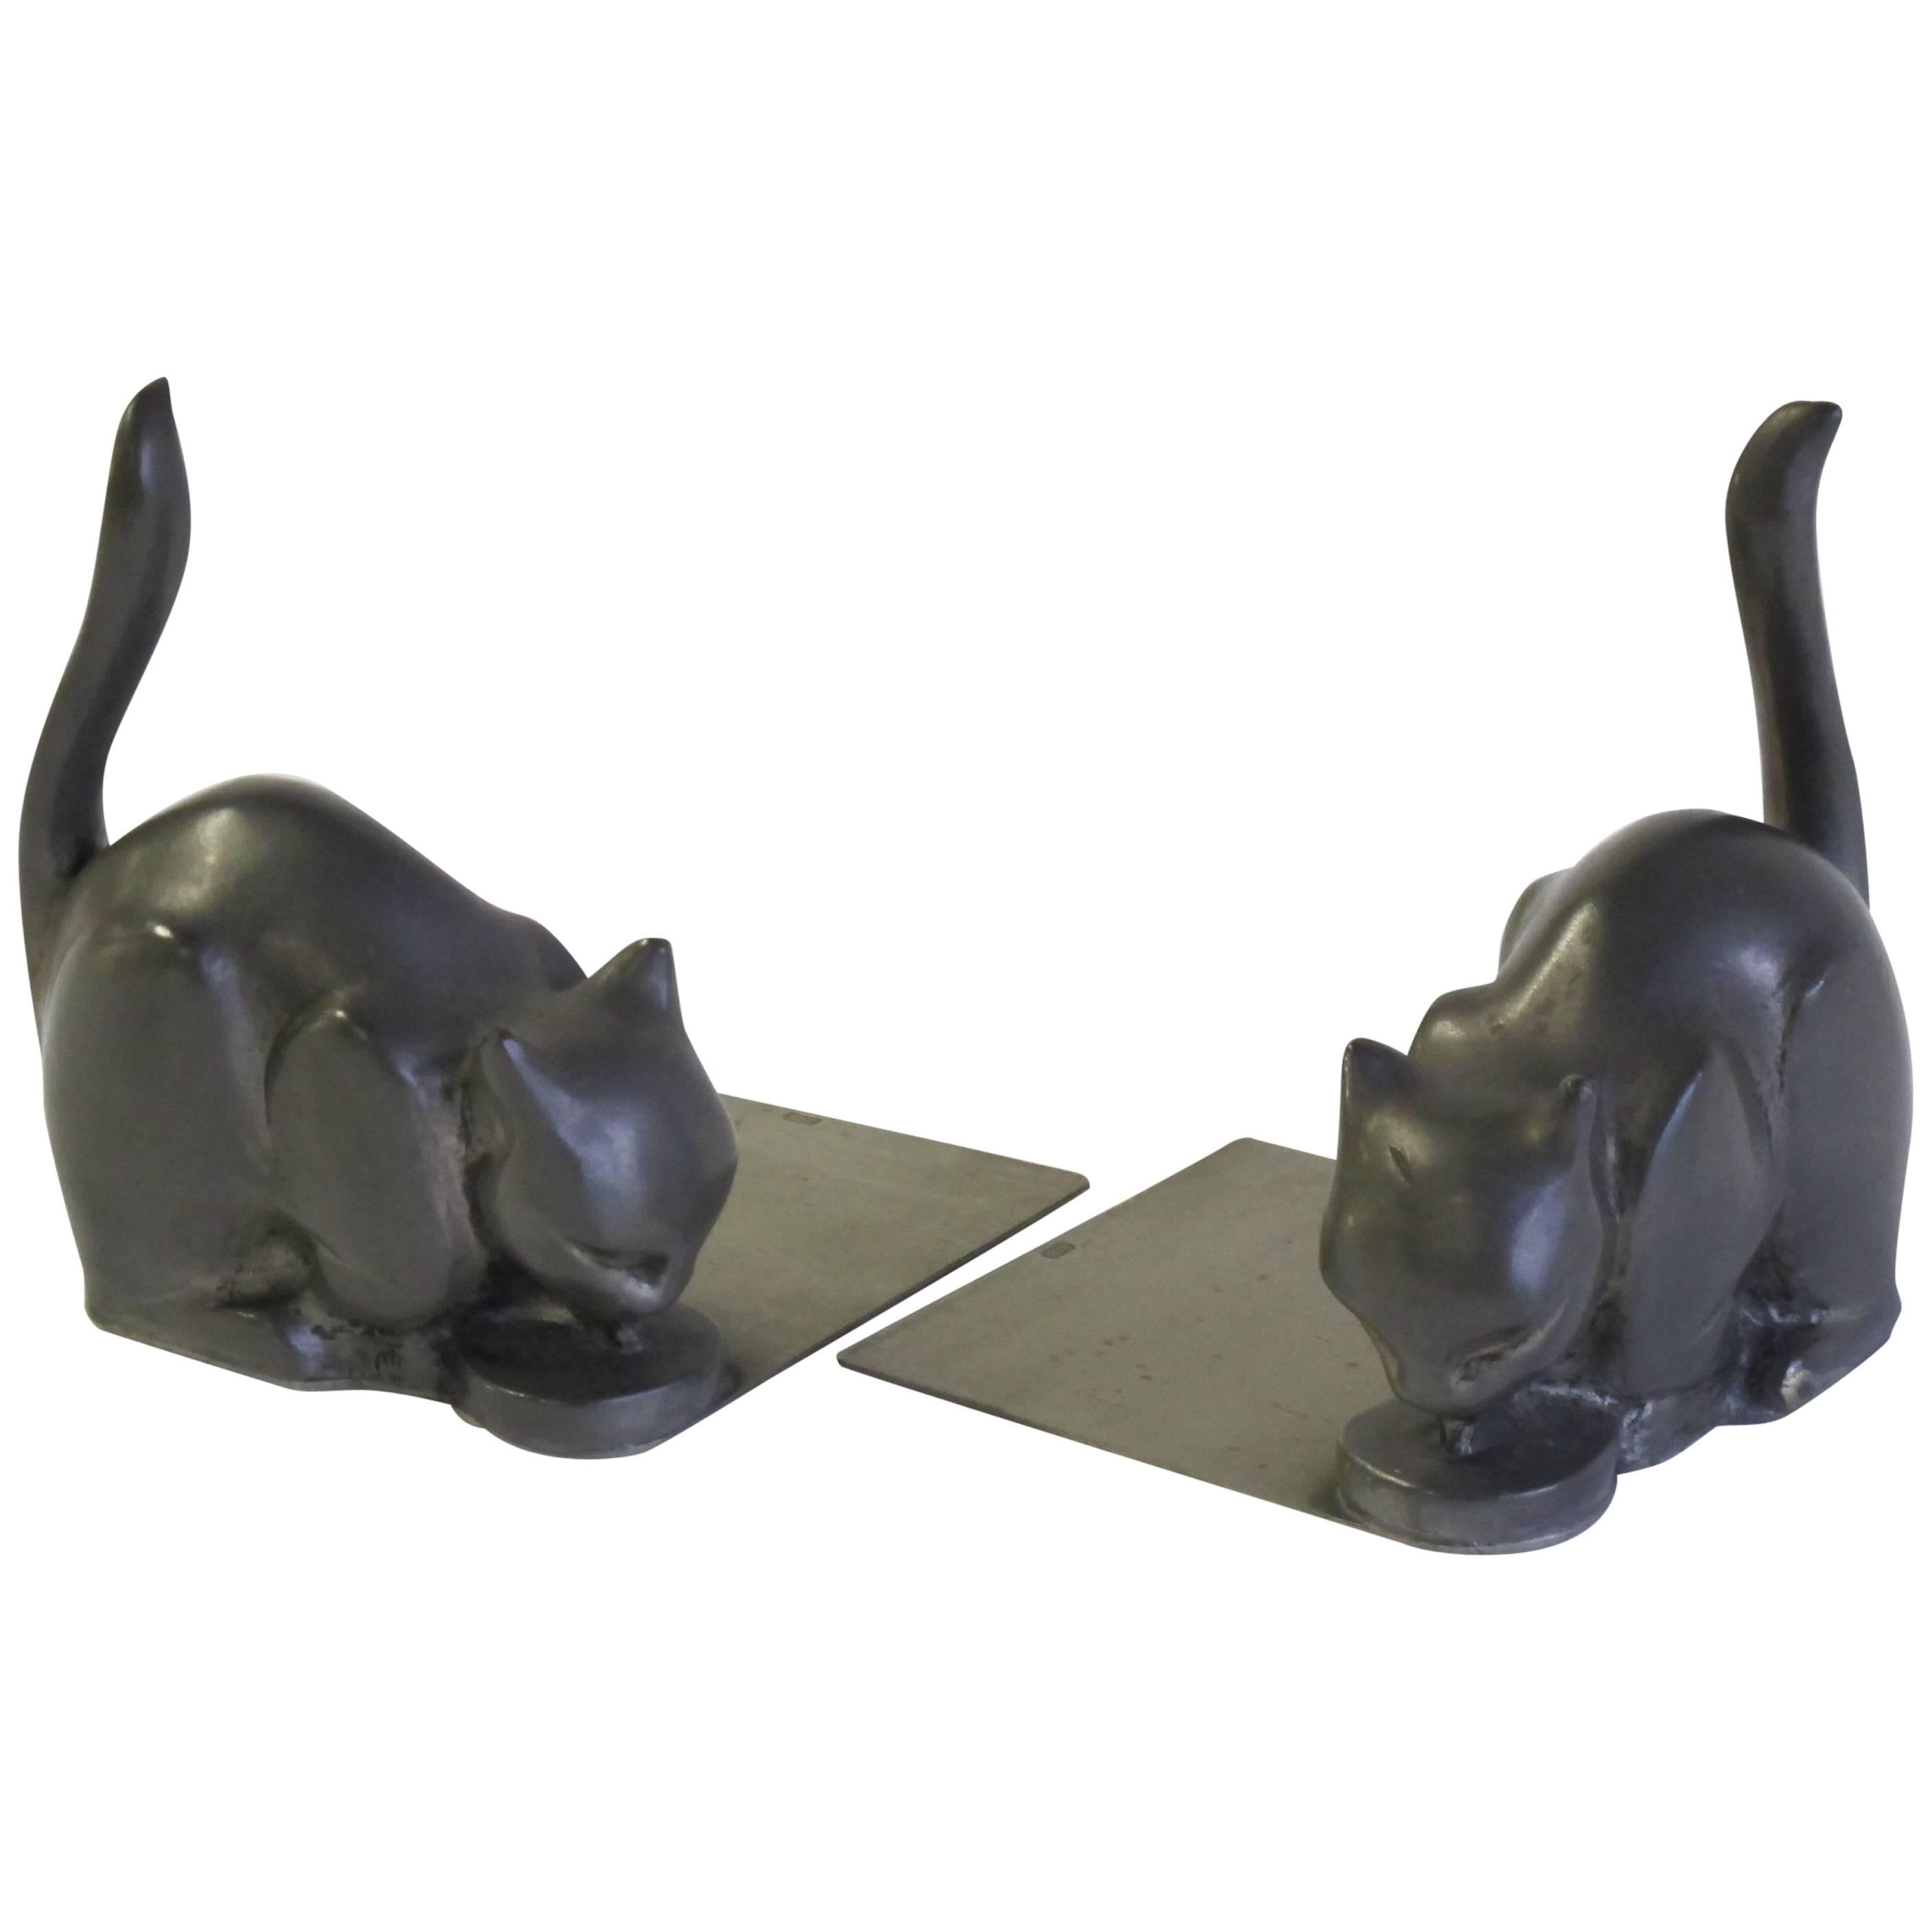 Two Art Deco Cat Bookends, designed by Chris van der Hoef for Gero, 1933 For Sale